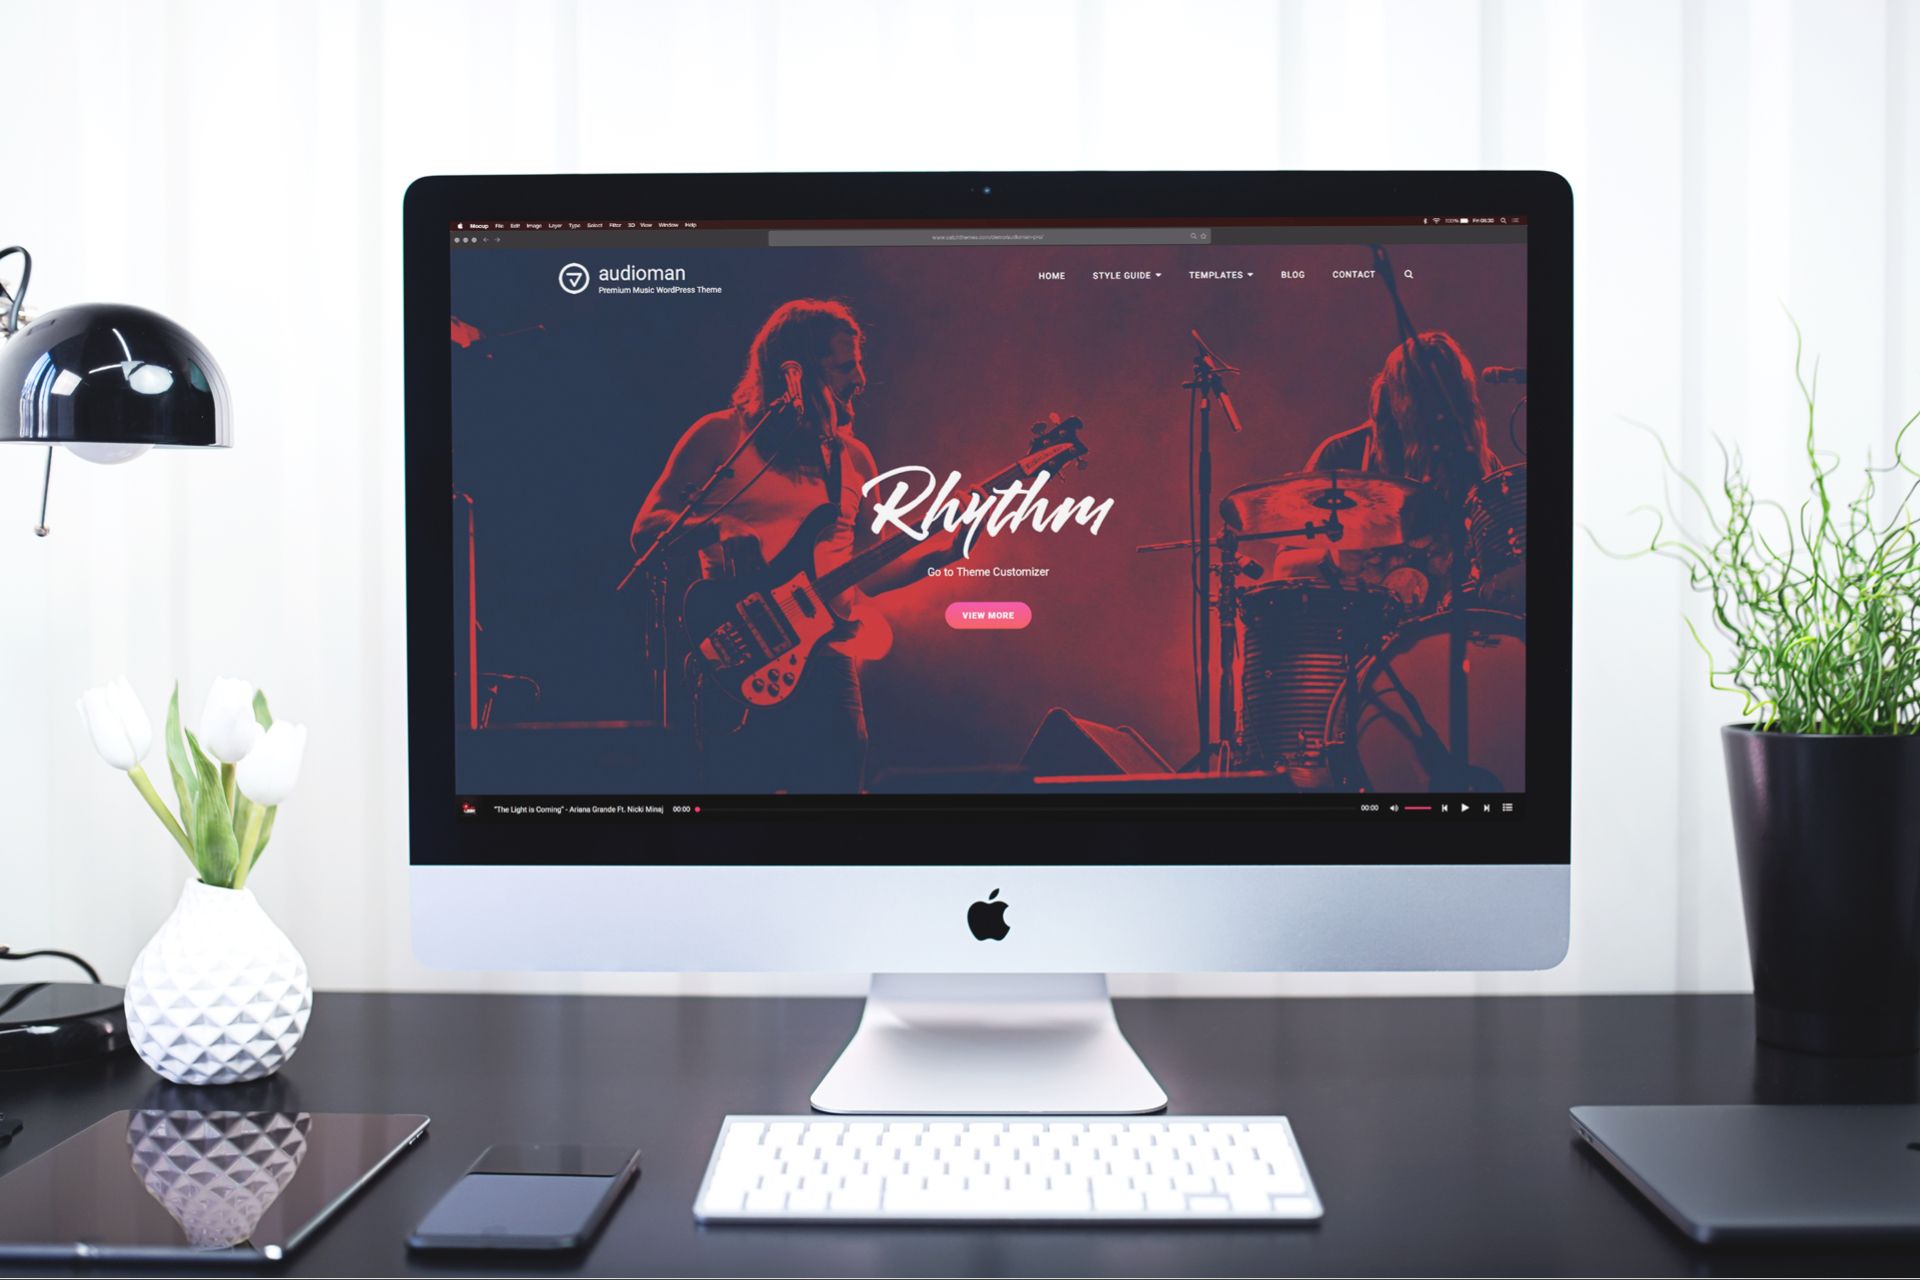 Introducing Audioman Pro – Music WordPress Theme for Musicians and Bands